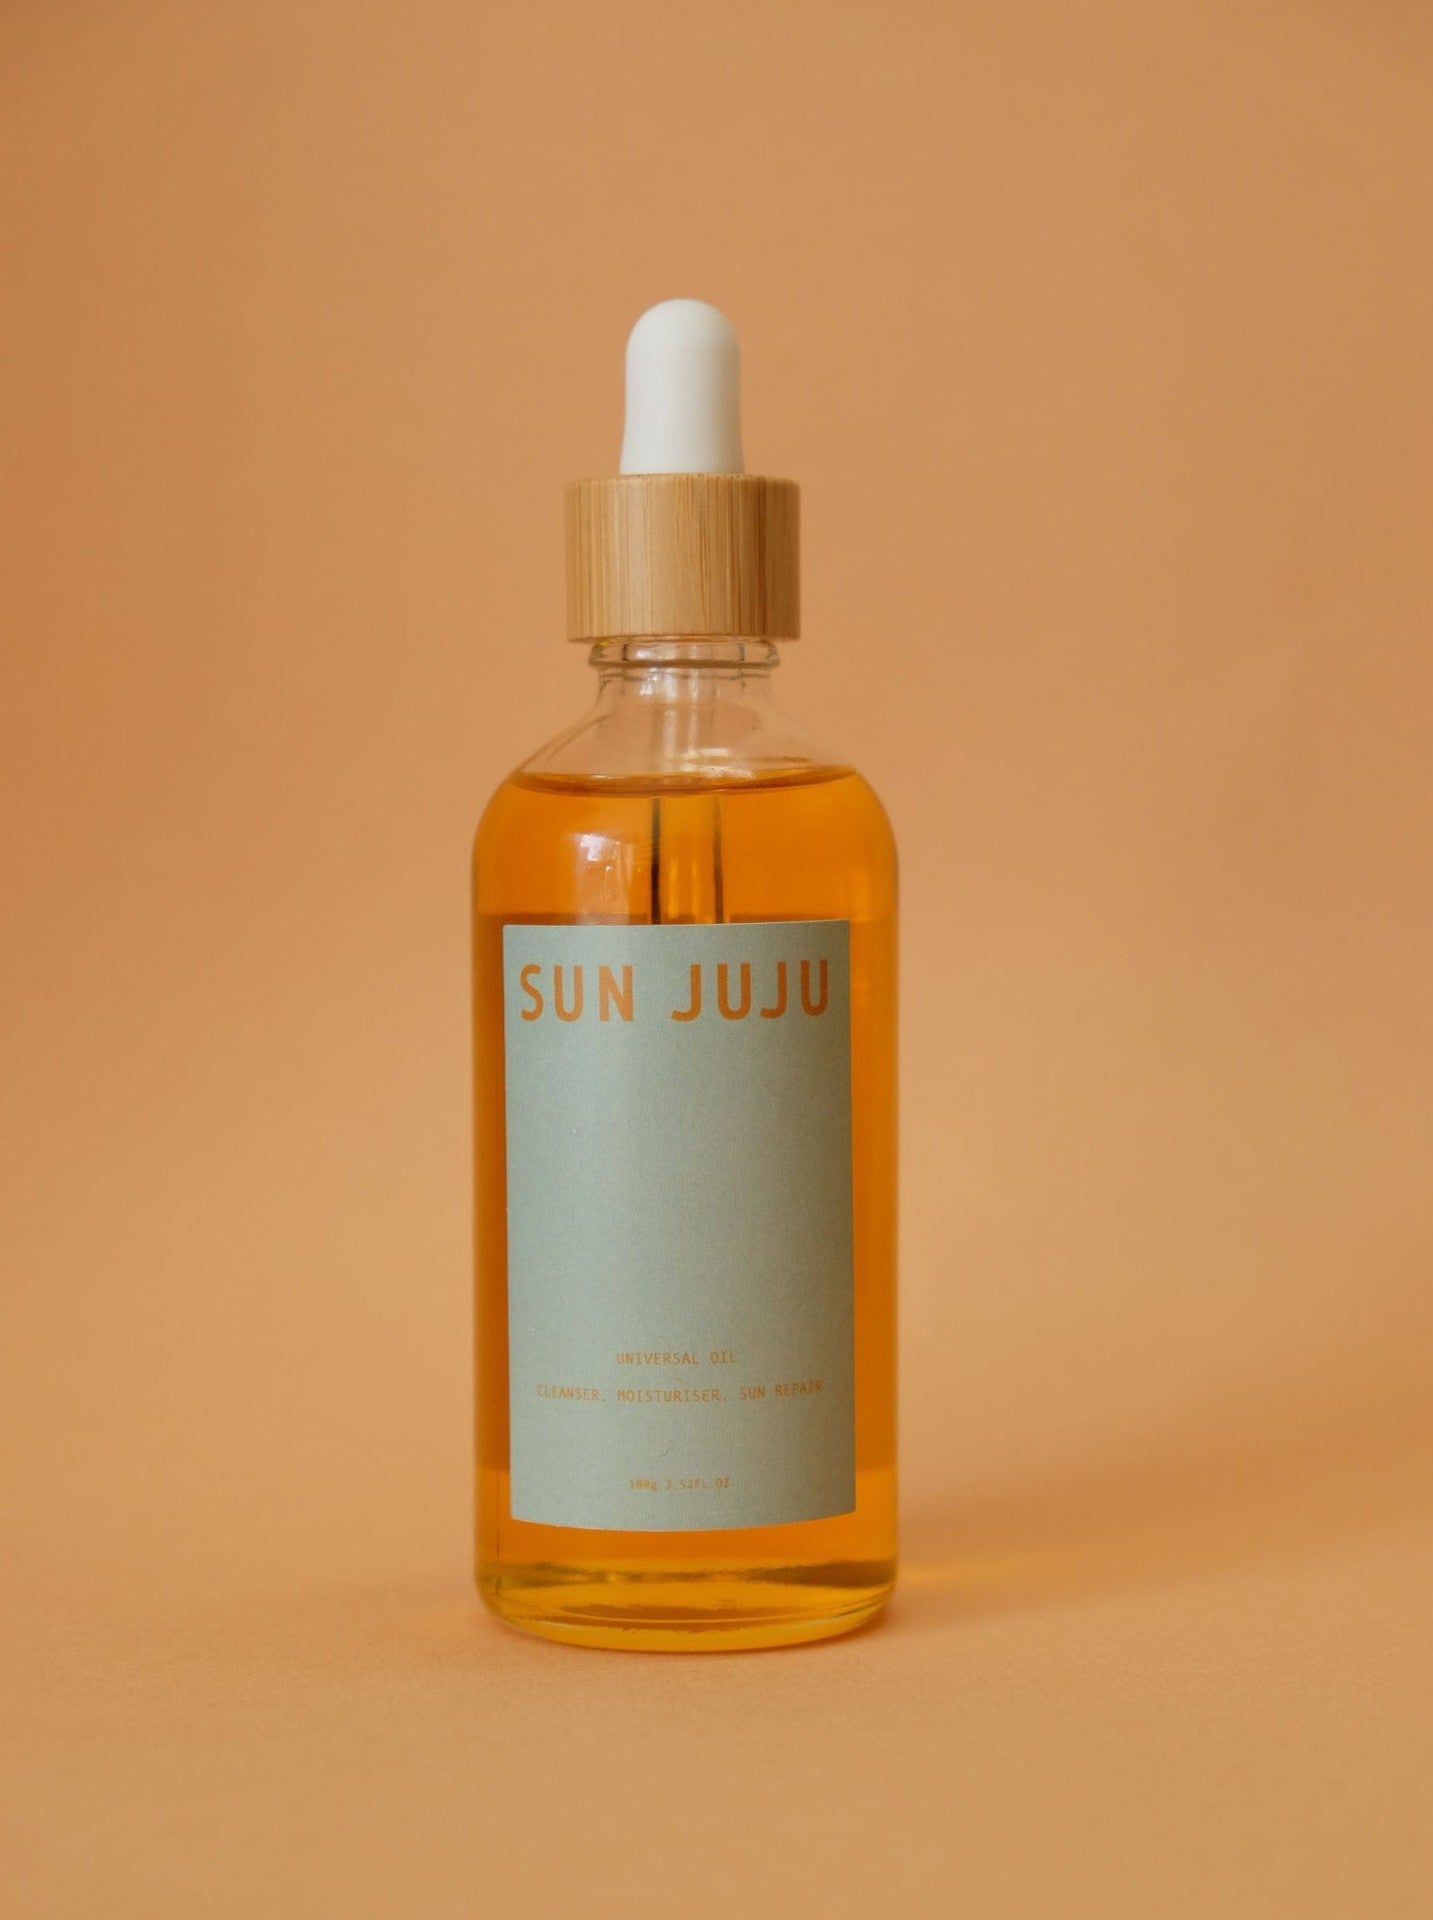 A bottle of Sun Juju Universal Oil – 100𝚐 on an orange background, promising to heal and hydrate.